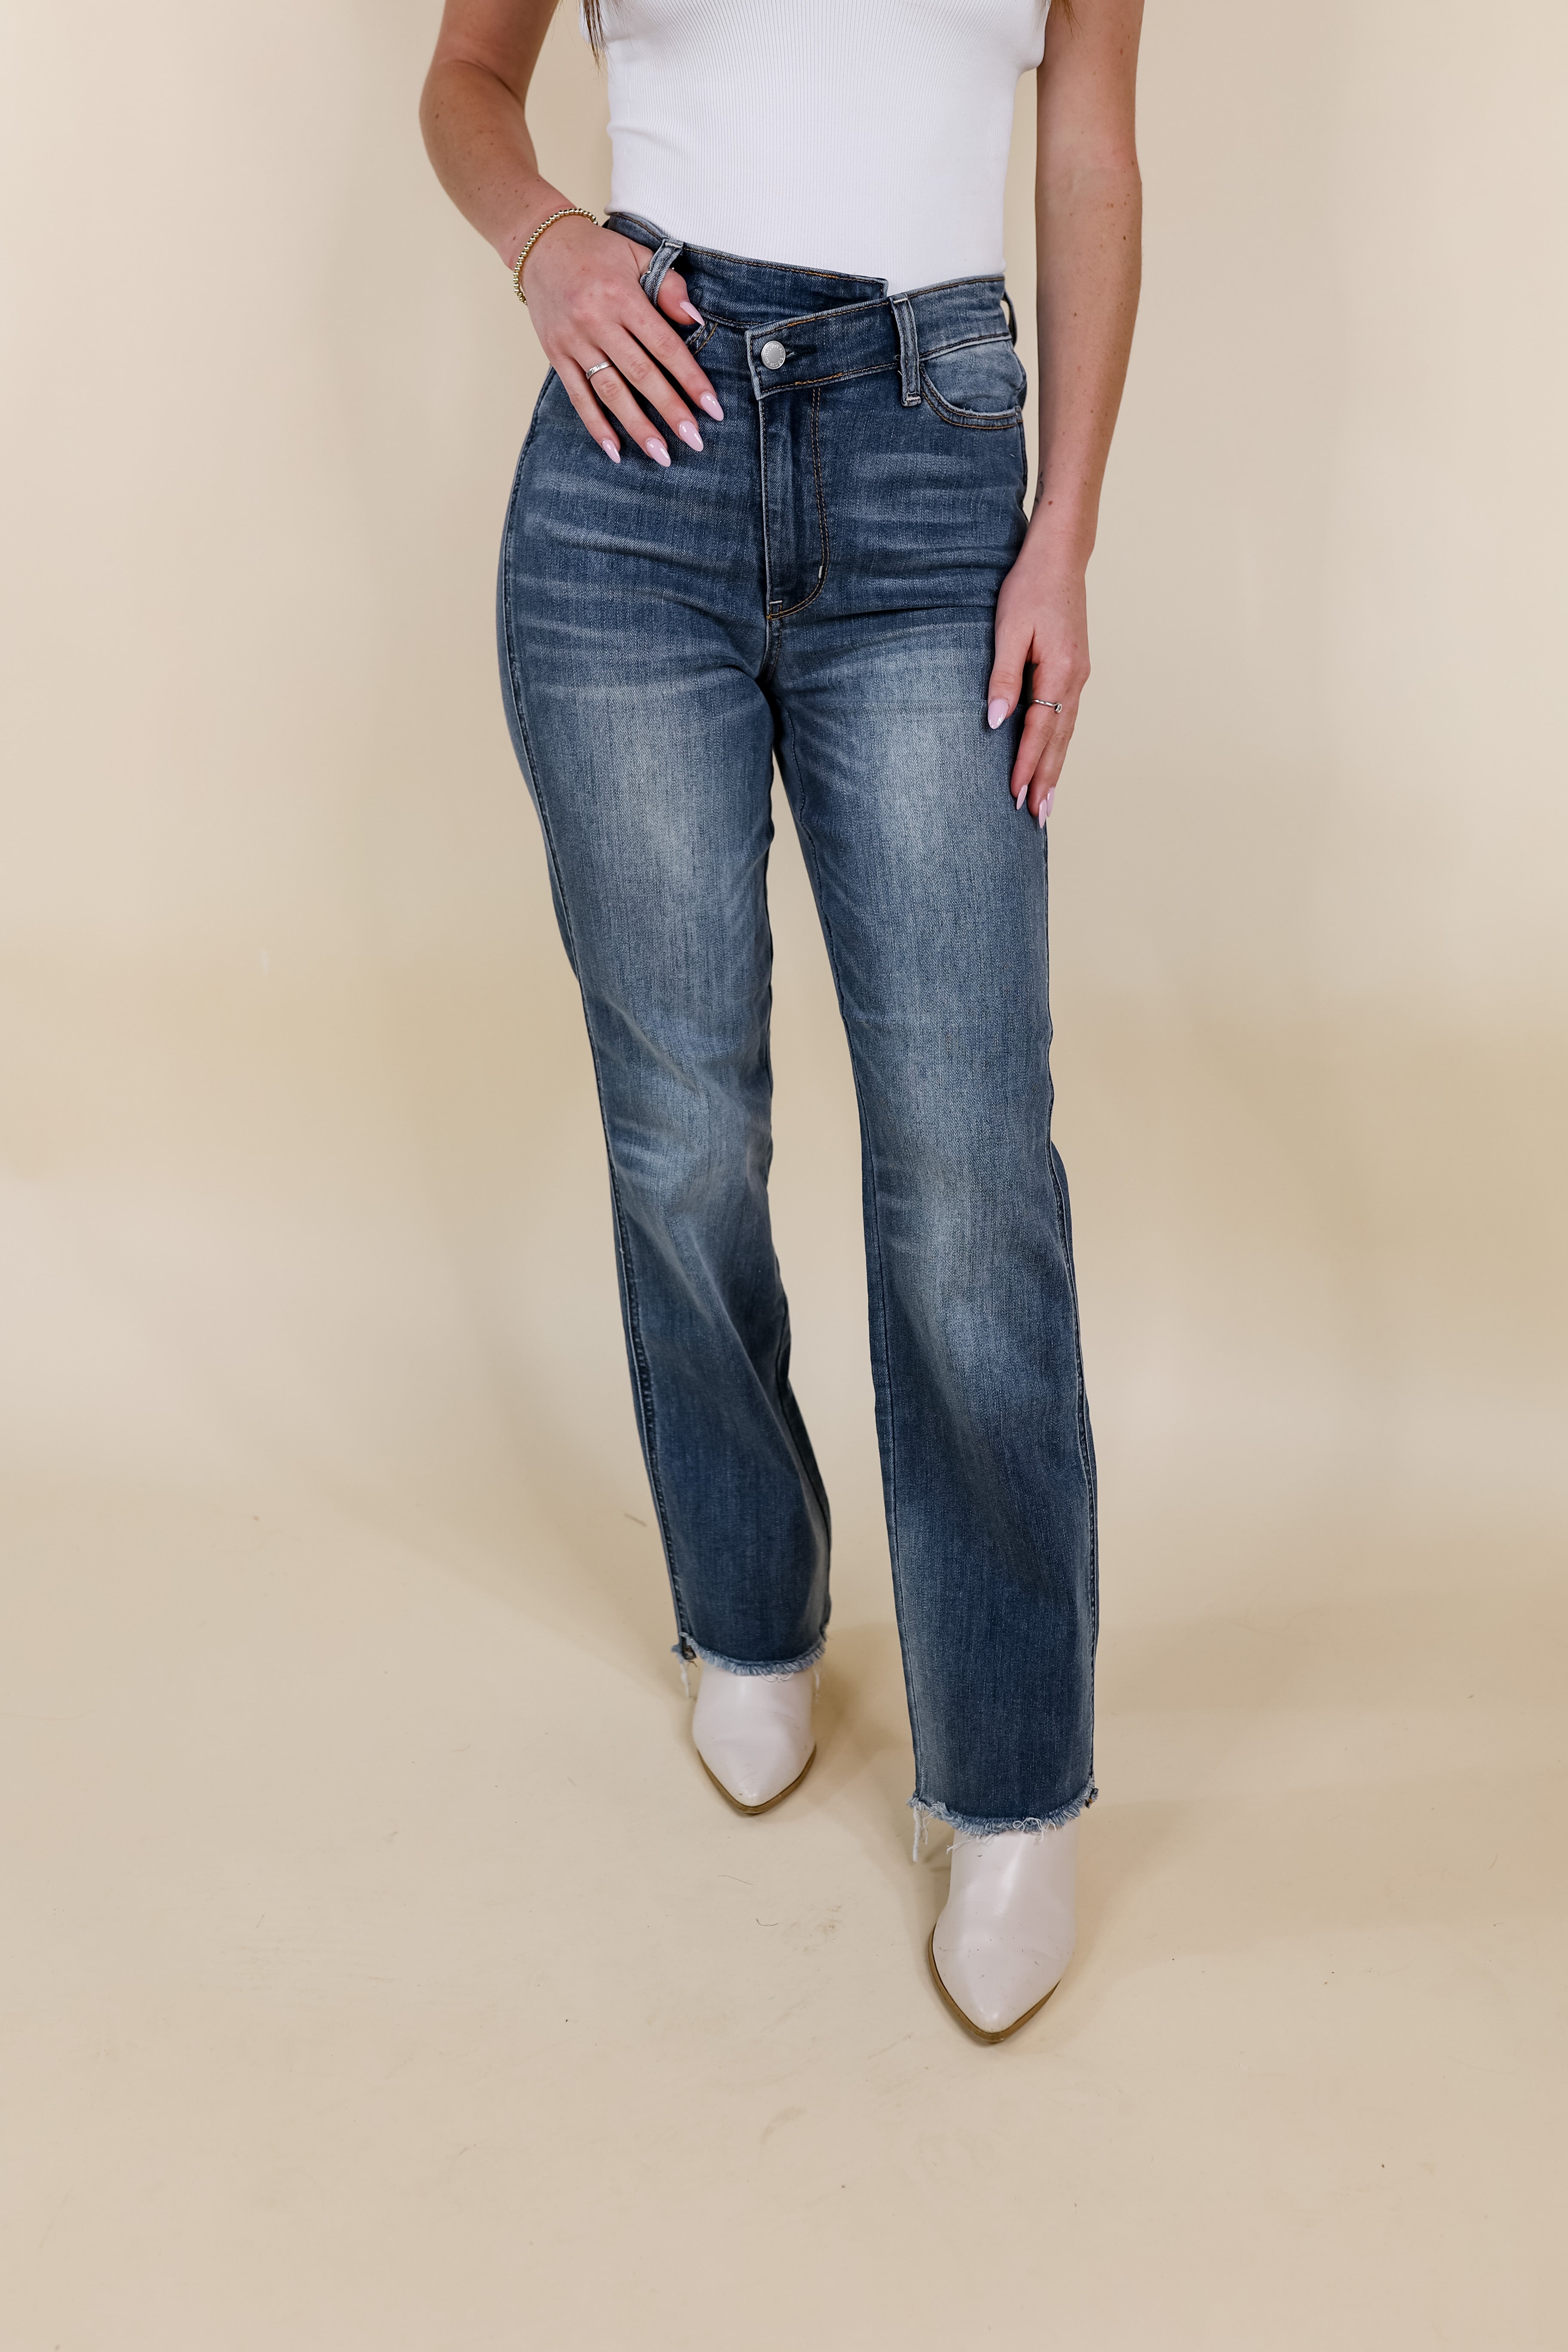 Judy Blue | Sure And Steady Criss-Cross Waistband Dad Jeans in Medium Wash